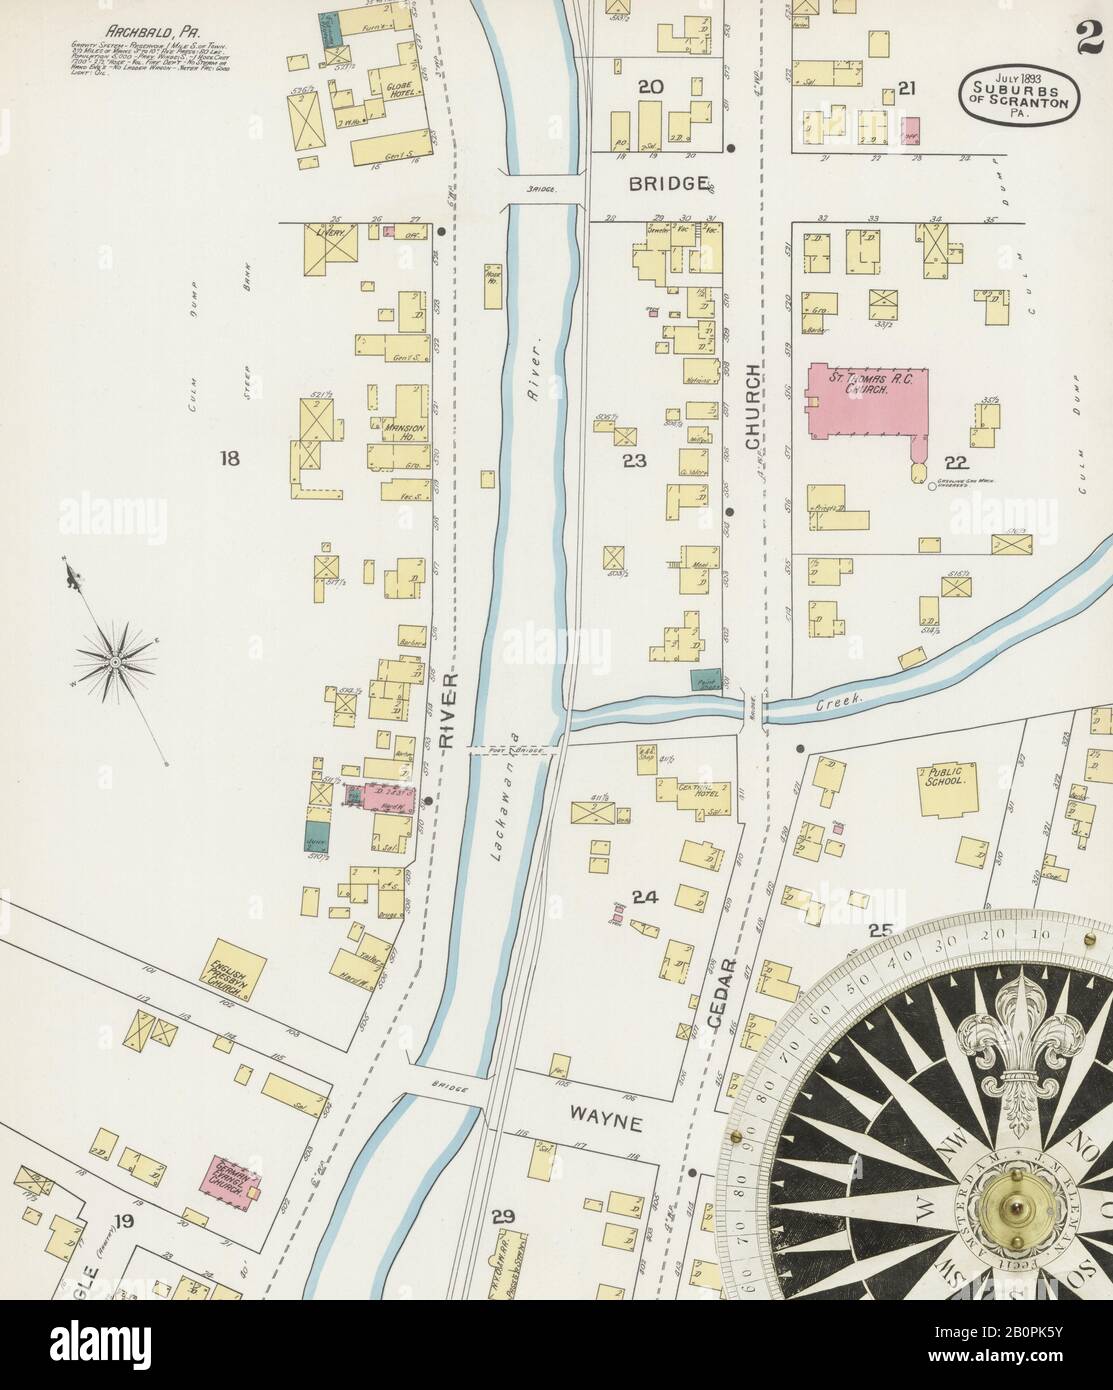 Image 2 of Sanborn Fire Insurance Map from Scranton Suburbs, Lackawanna County, Pennsylvania. Jul 1893. 5 Sheet(s). Includes Archbald, Dalton, Moosic, Moscow, Peckville, Taylorville, Waverly, America, street map with a Nineteenth Century compass Stock Photo